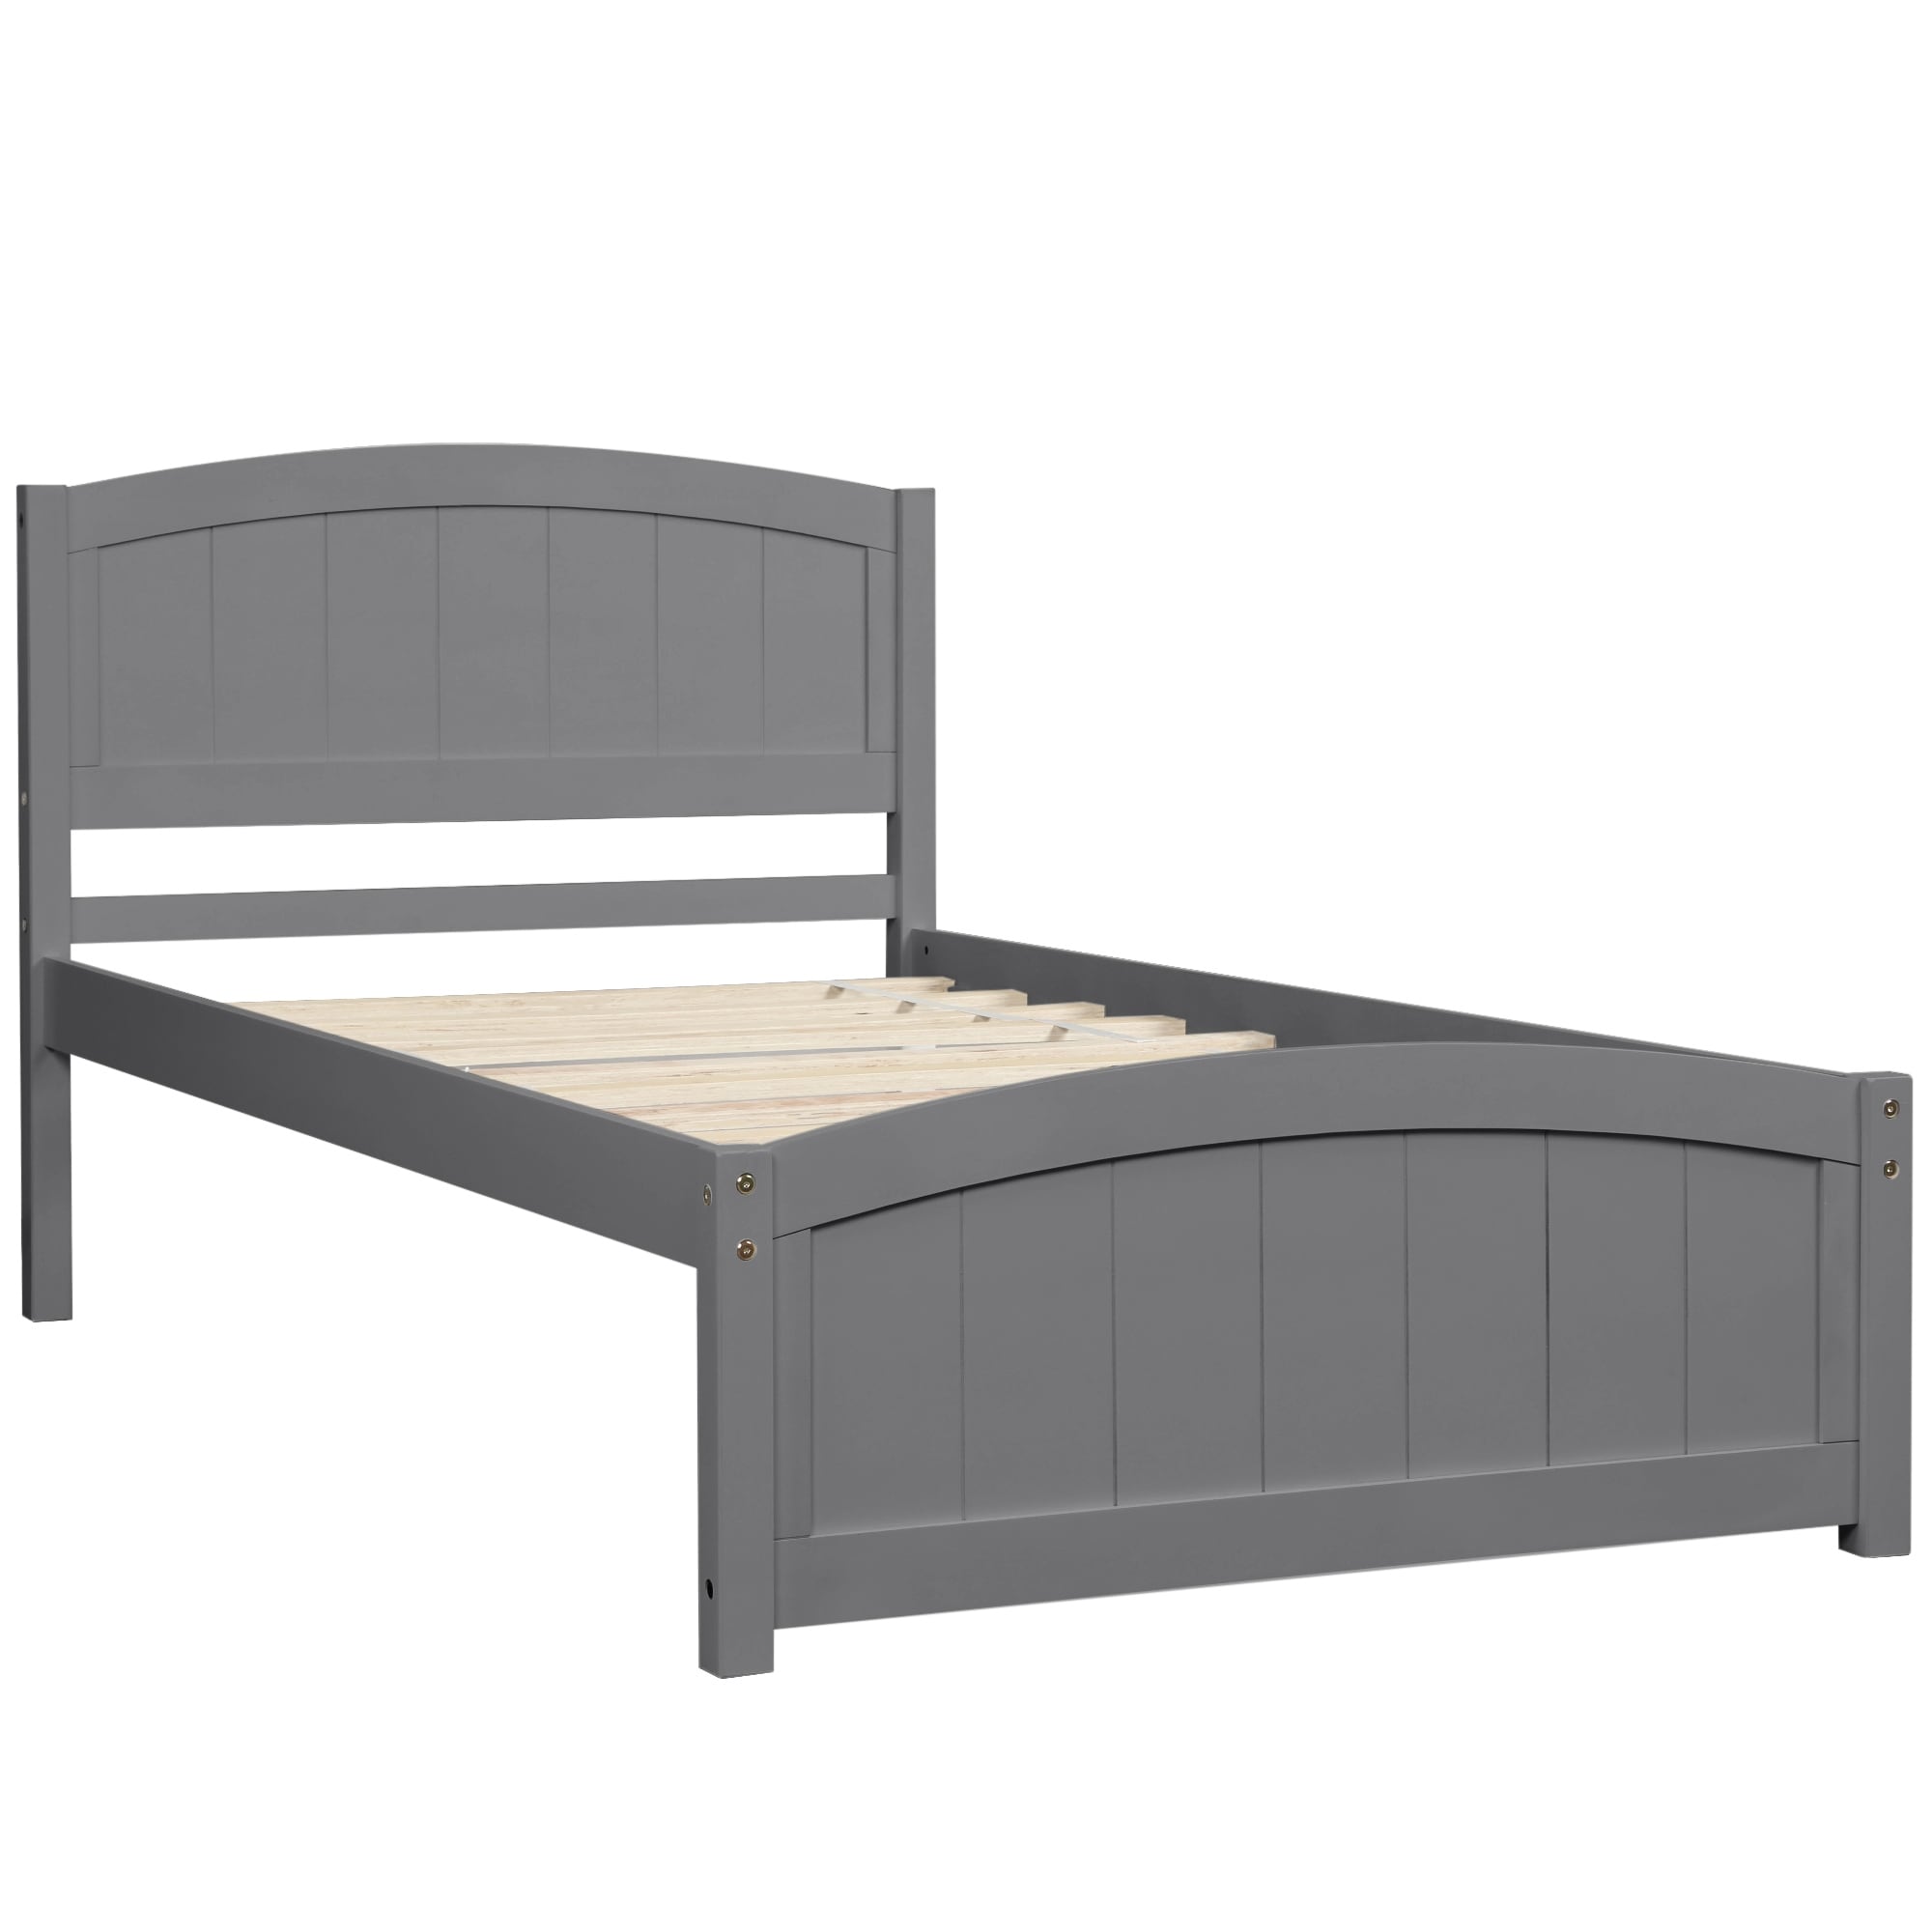 Designs Twin Bed Frame w/headboard  Footboard and Wood Slat Support grey